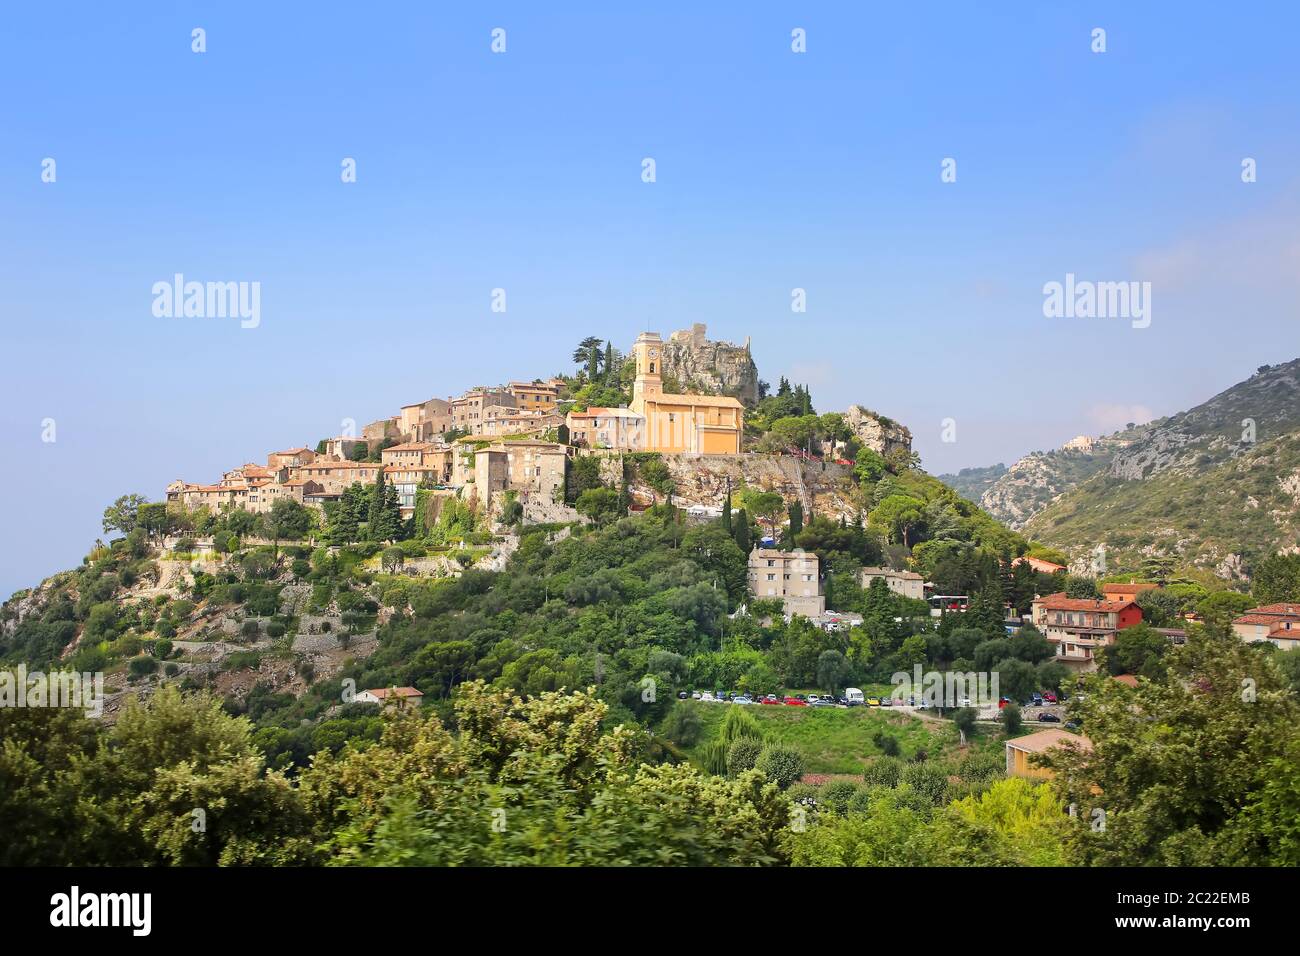 Beautiful hilltop medieval village of Eze. The historic village is ...